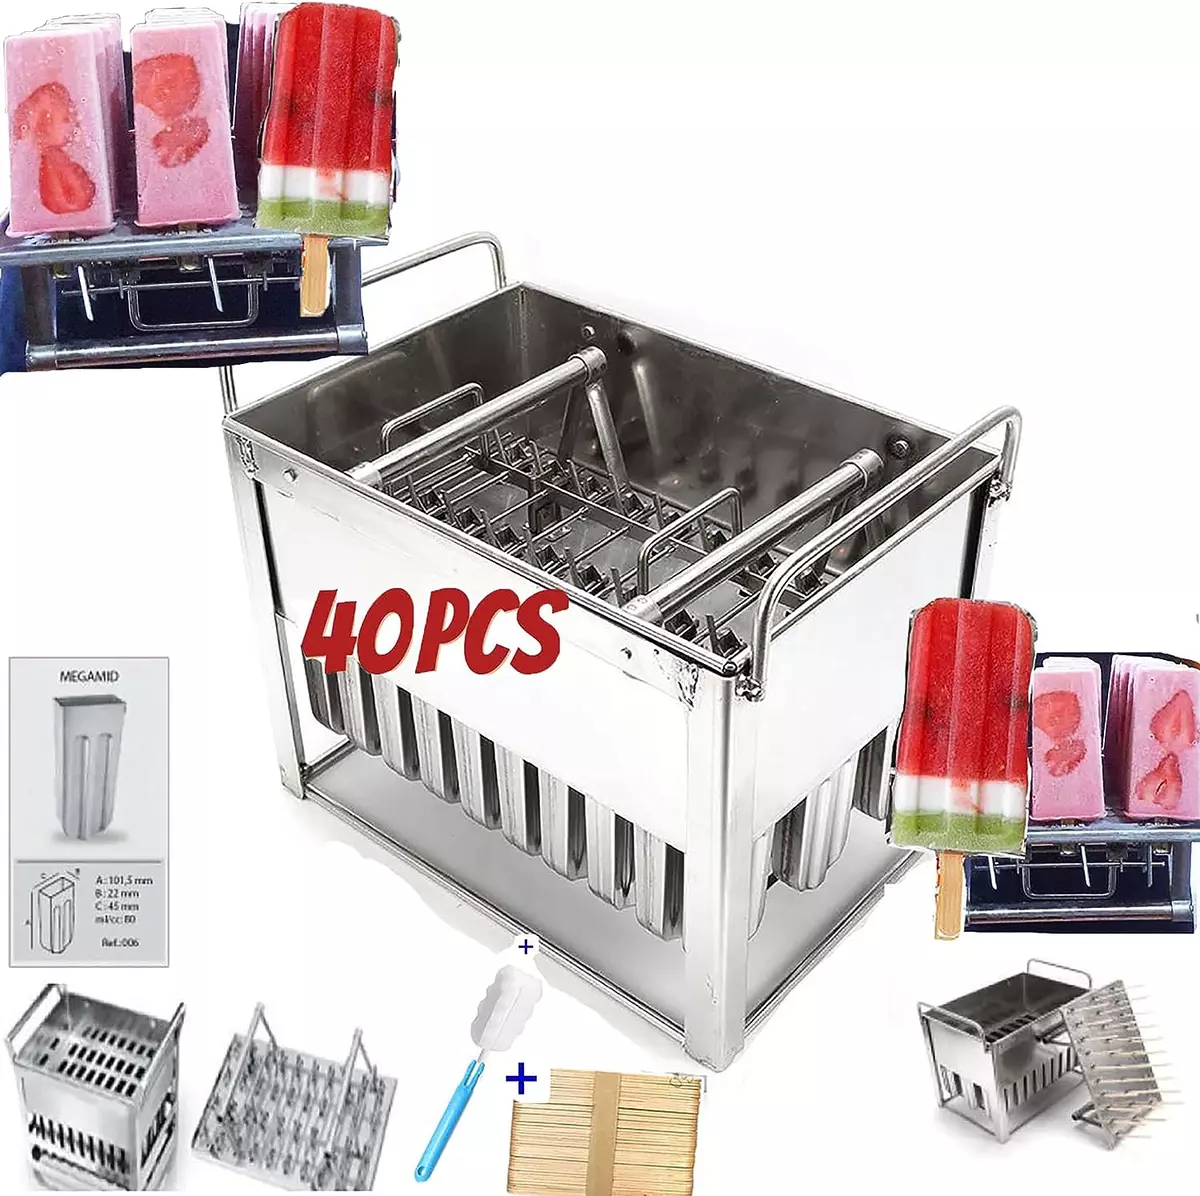 40Pcs Stainless Steel Popsicle Mold Machine -Ice Pop Molds Bpa Free -Ice  Cream M